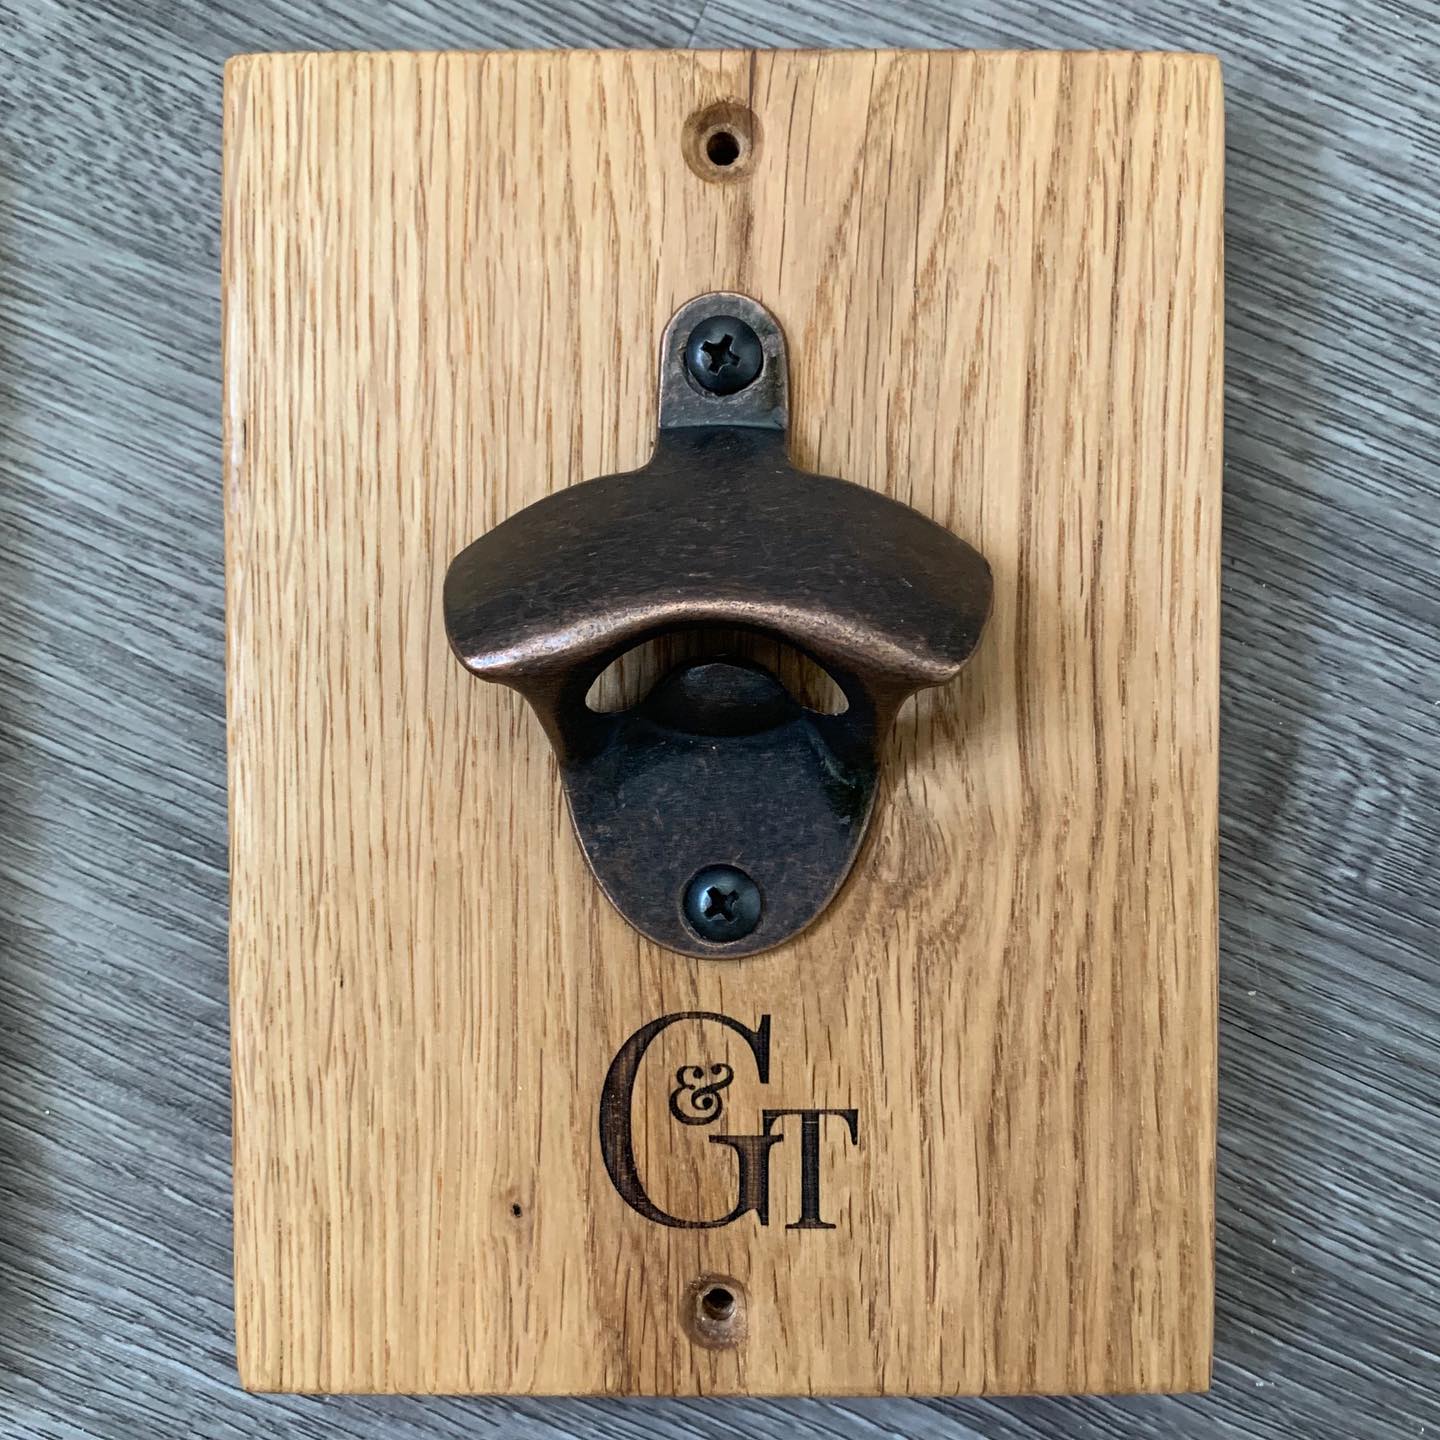 Our Oak wall mounted Bottle Openers will be available online this week! £12 plus P&P They’re one of our favourite products as each one has its own unique character. ...#handmade #home #gandt #makersmarketfromhome #homedecor #craft #madefromwood #design #smallbusinessgoals #shopindependent #stayathome #lifestyle #workingfromhome #gingerandtweed